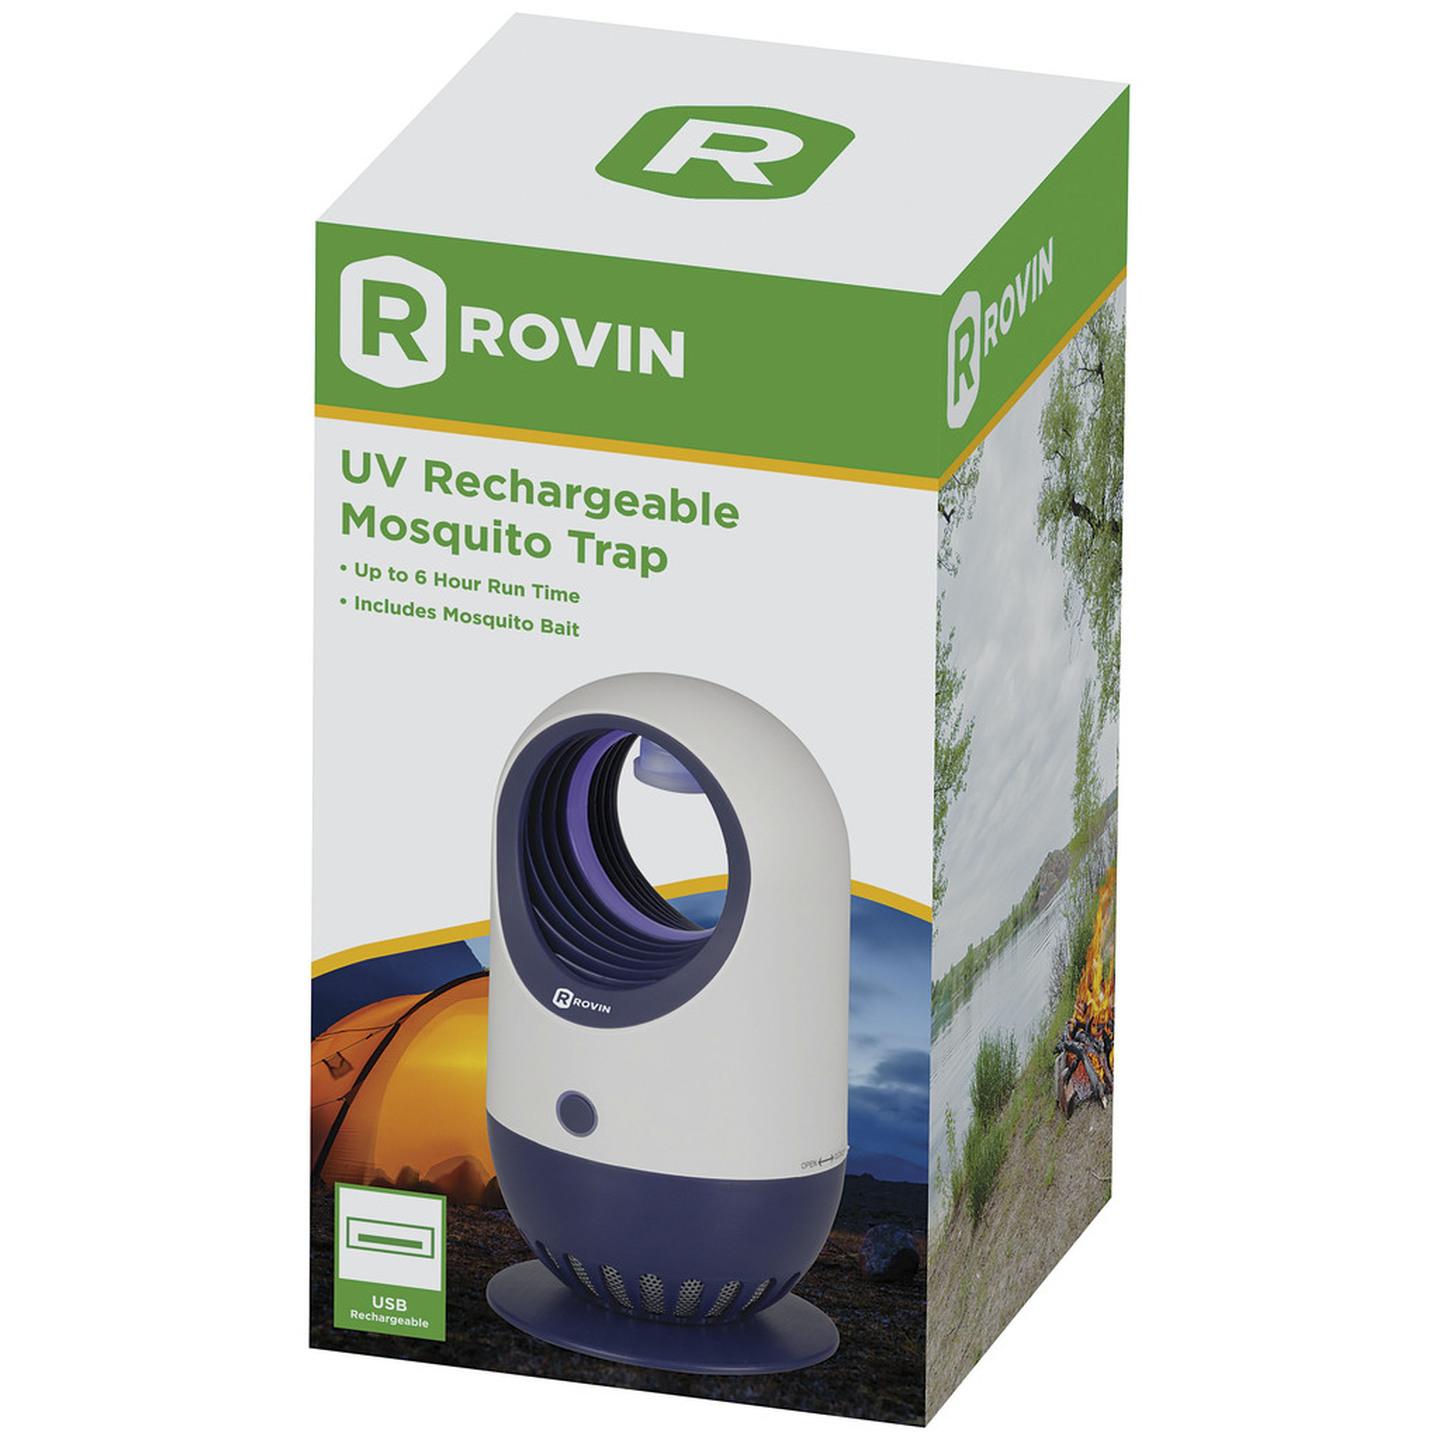 UV Rechargeable Mosquito Trap